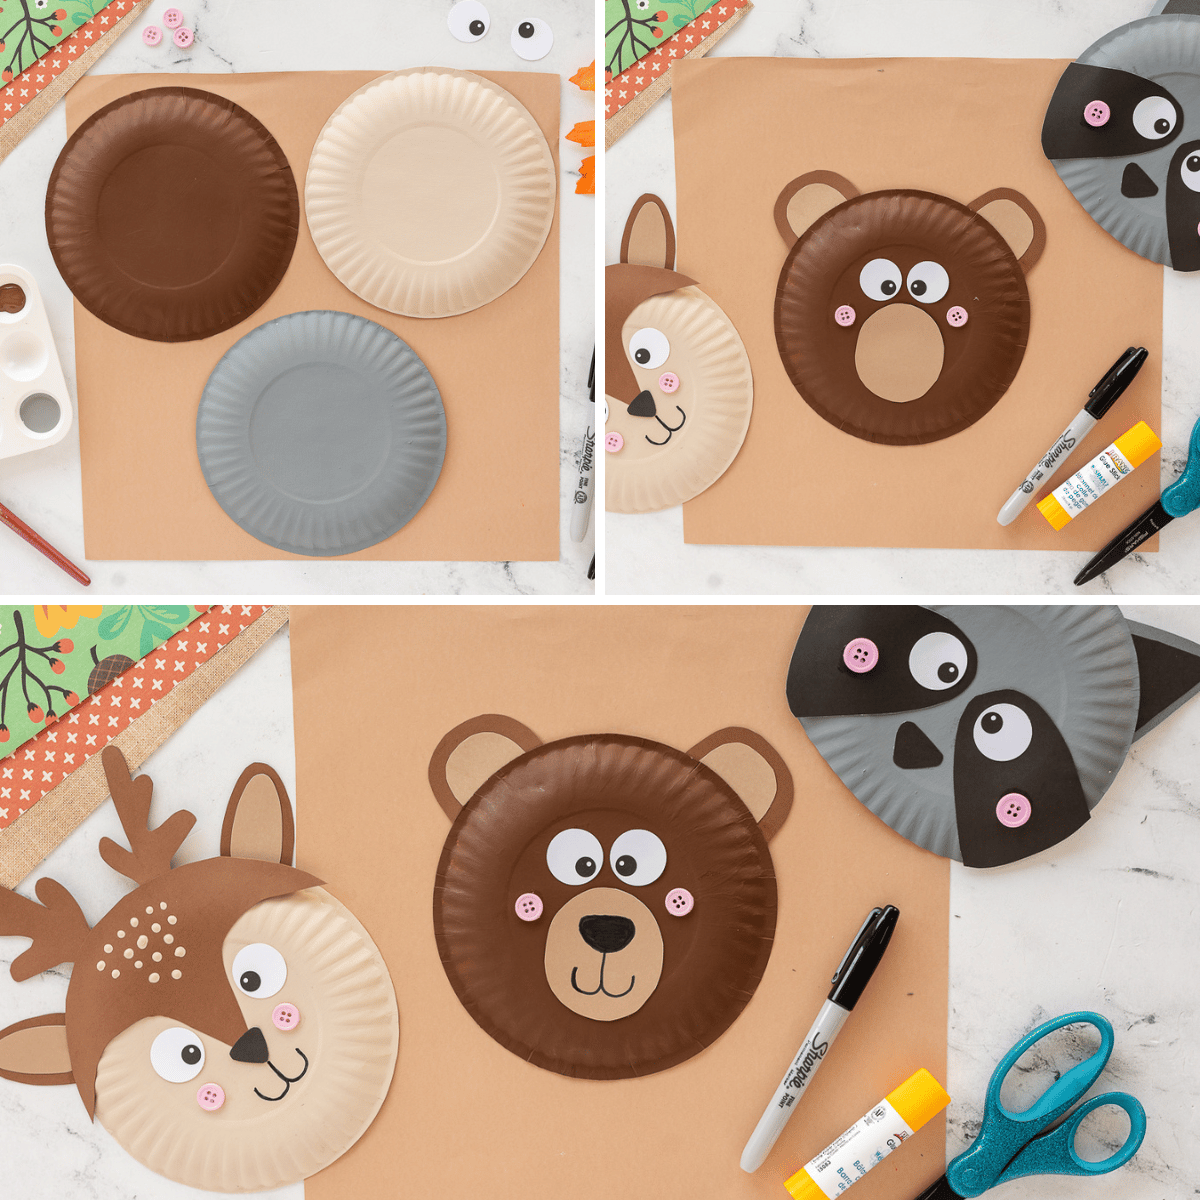 painted paper plates on brown paper on craft table